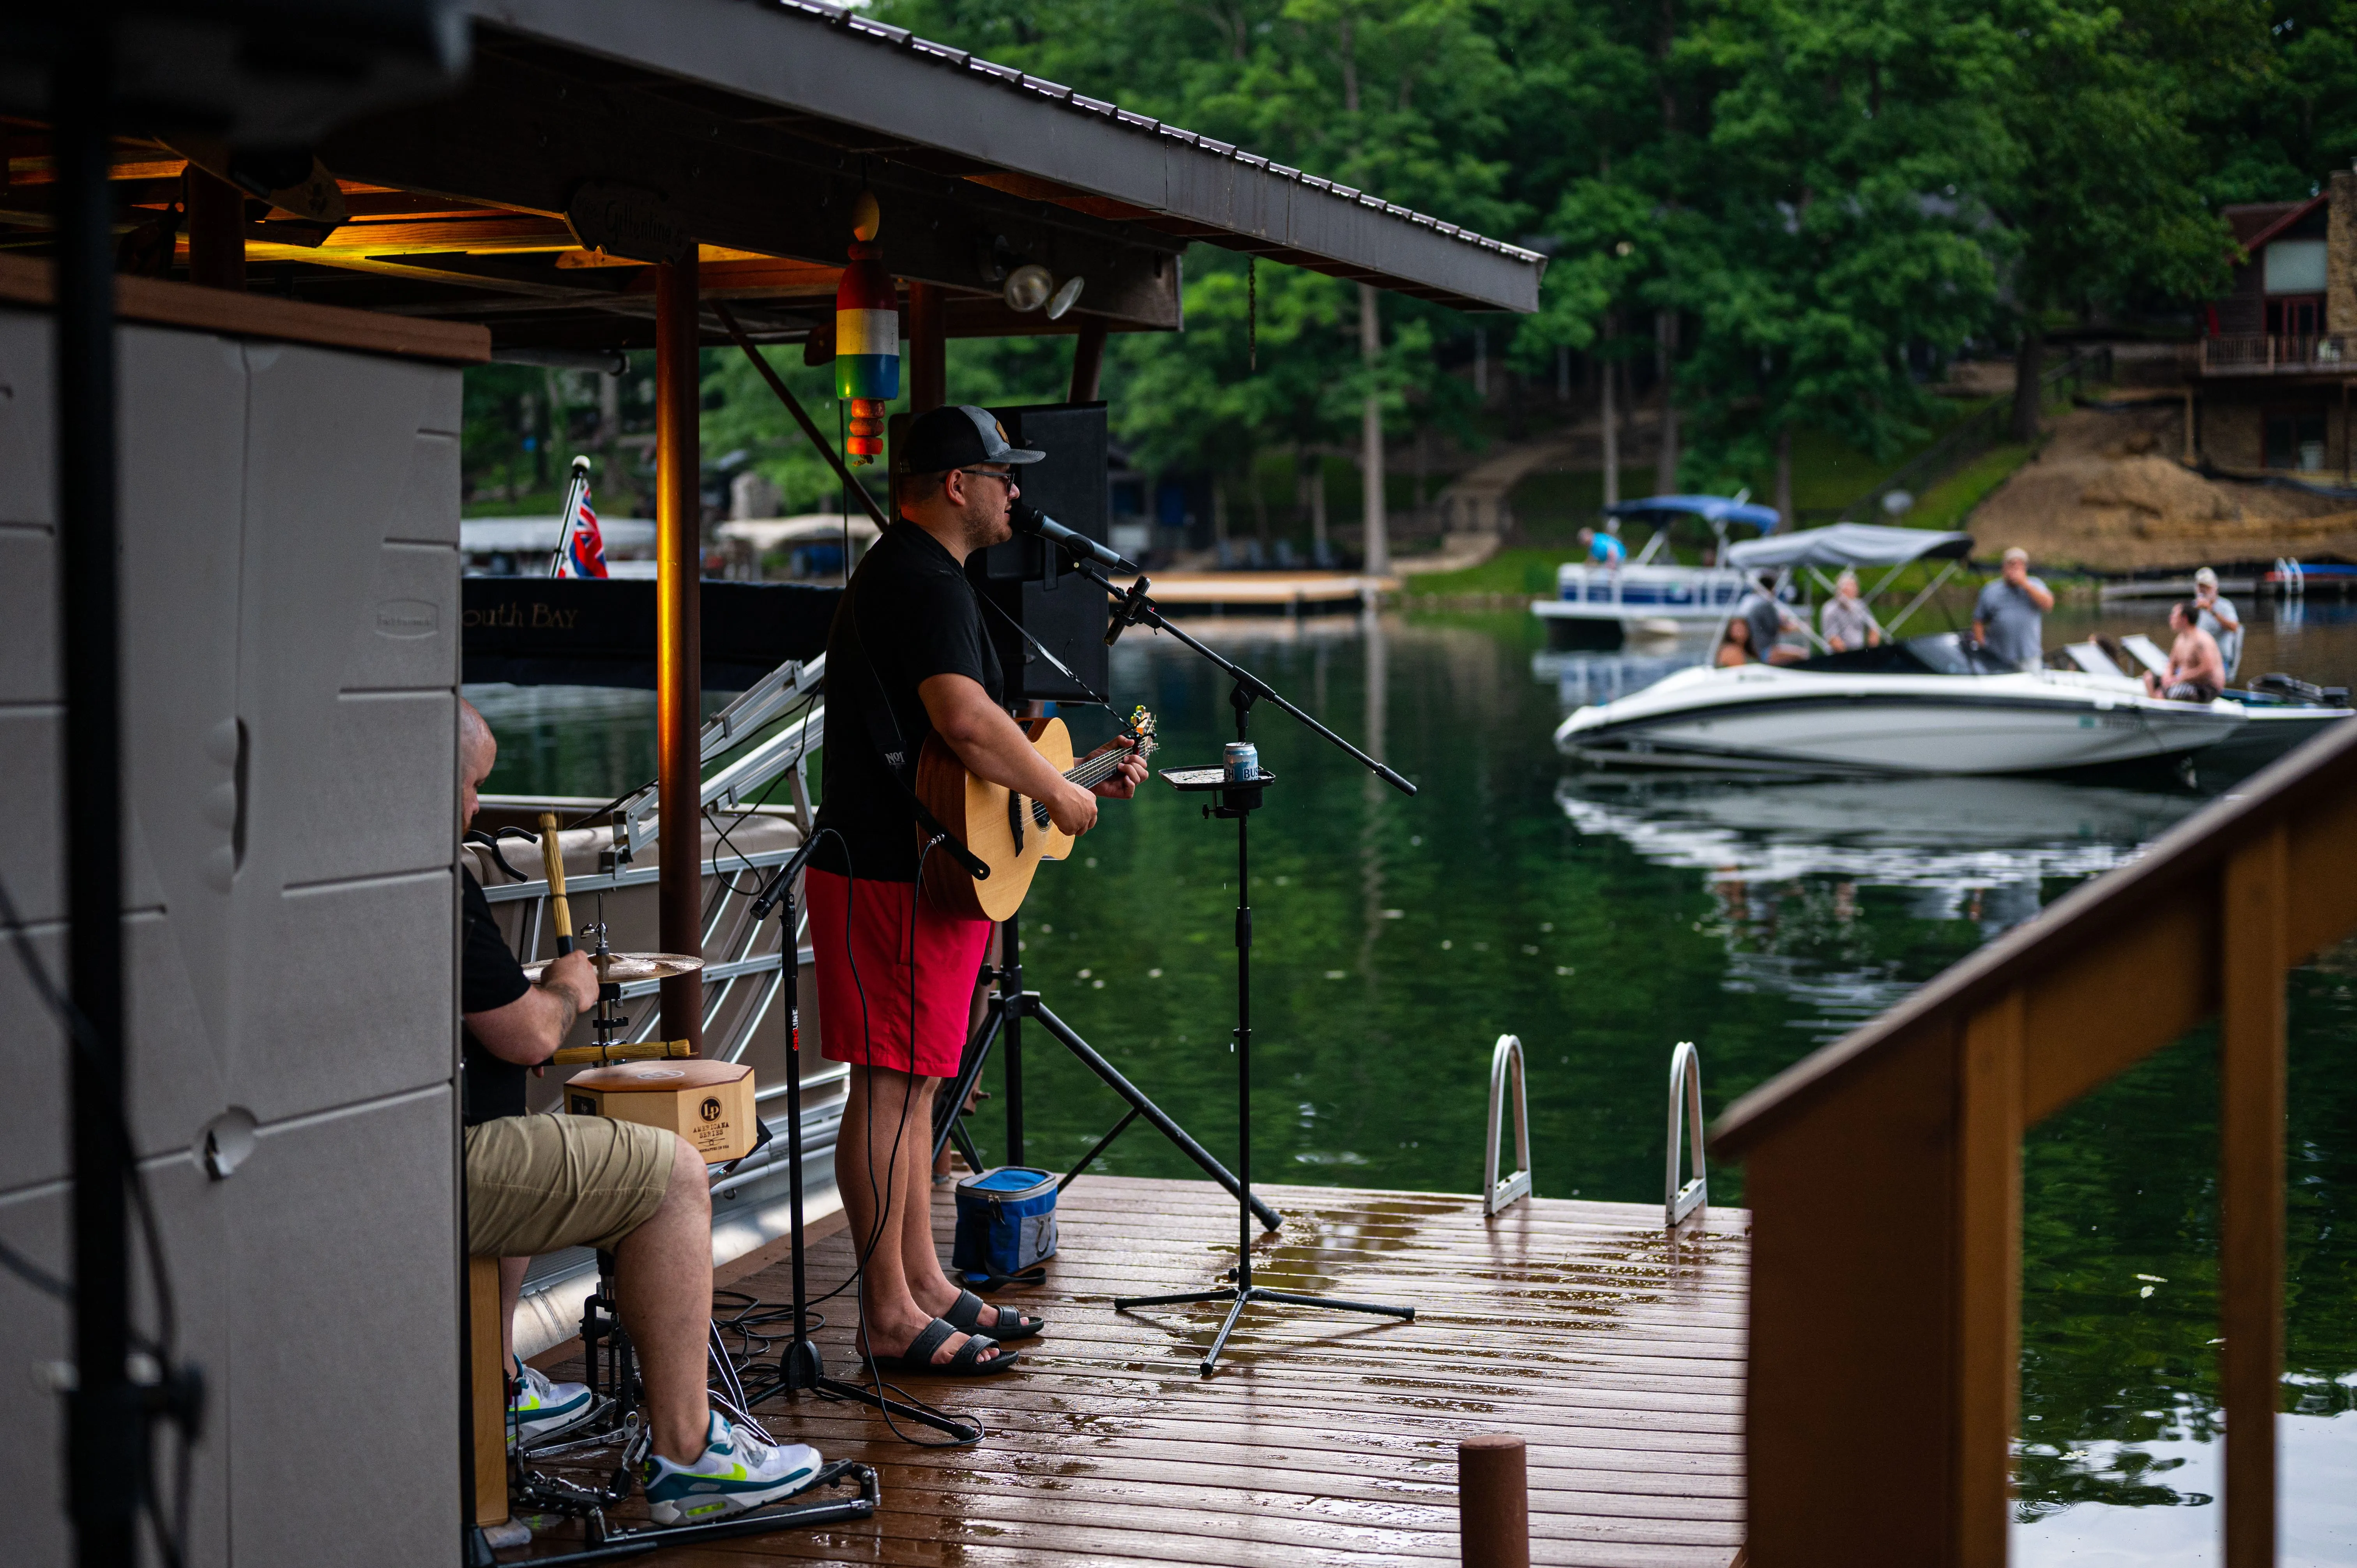 Two musicians performing on a lakeside dock with boats in the background.